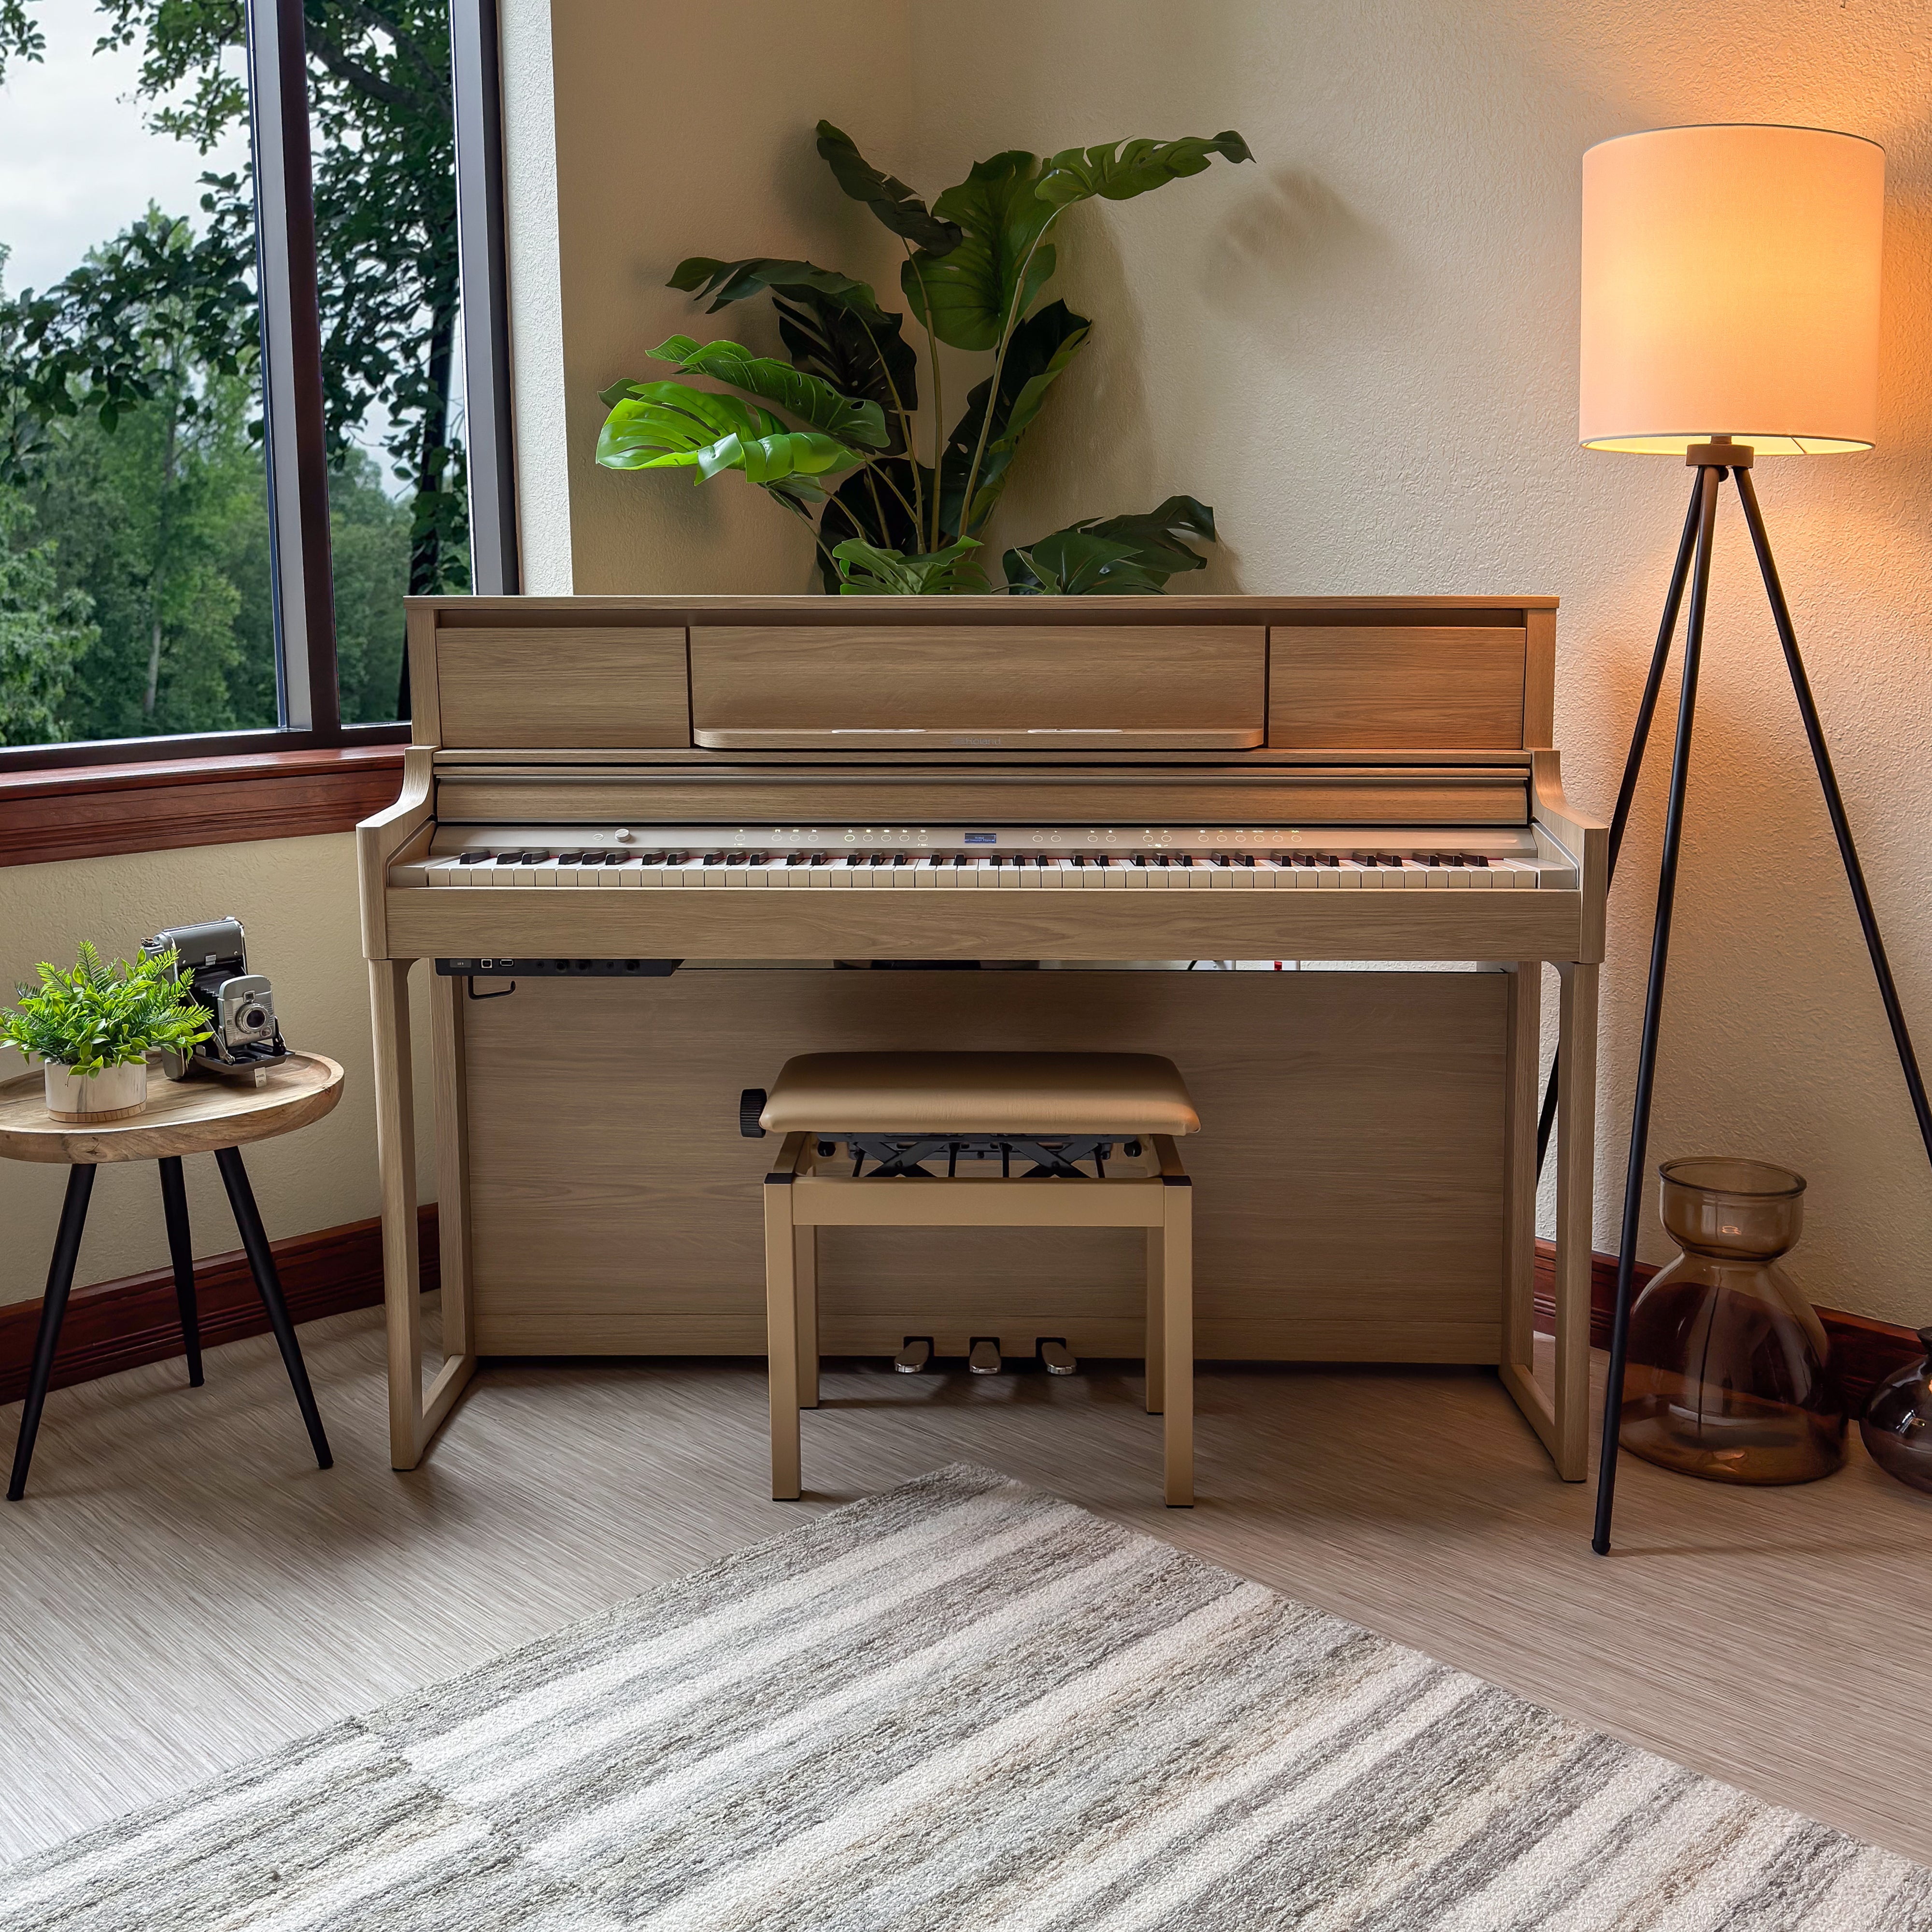 Roland LX-5 Digital Piano with Bench - Light Oak - View 26